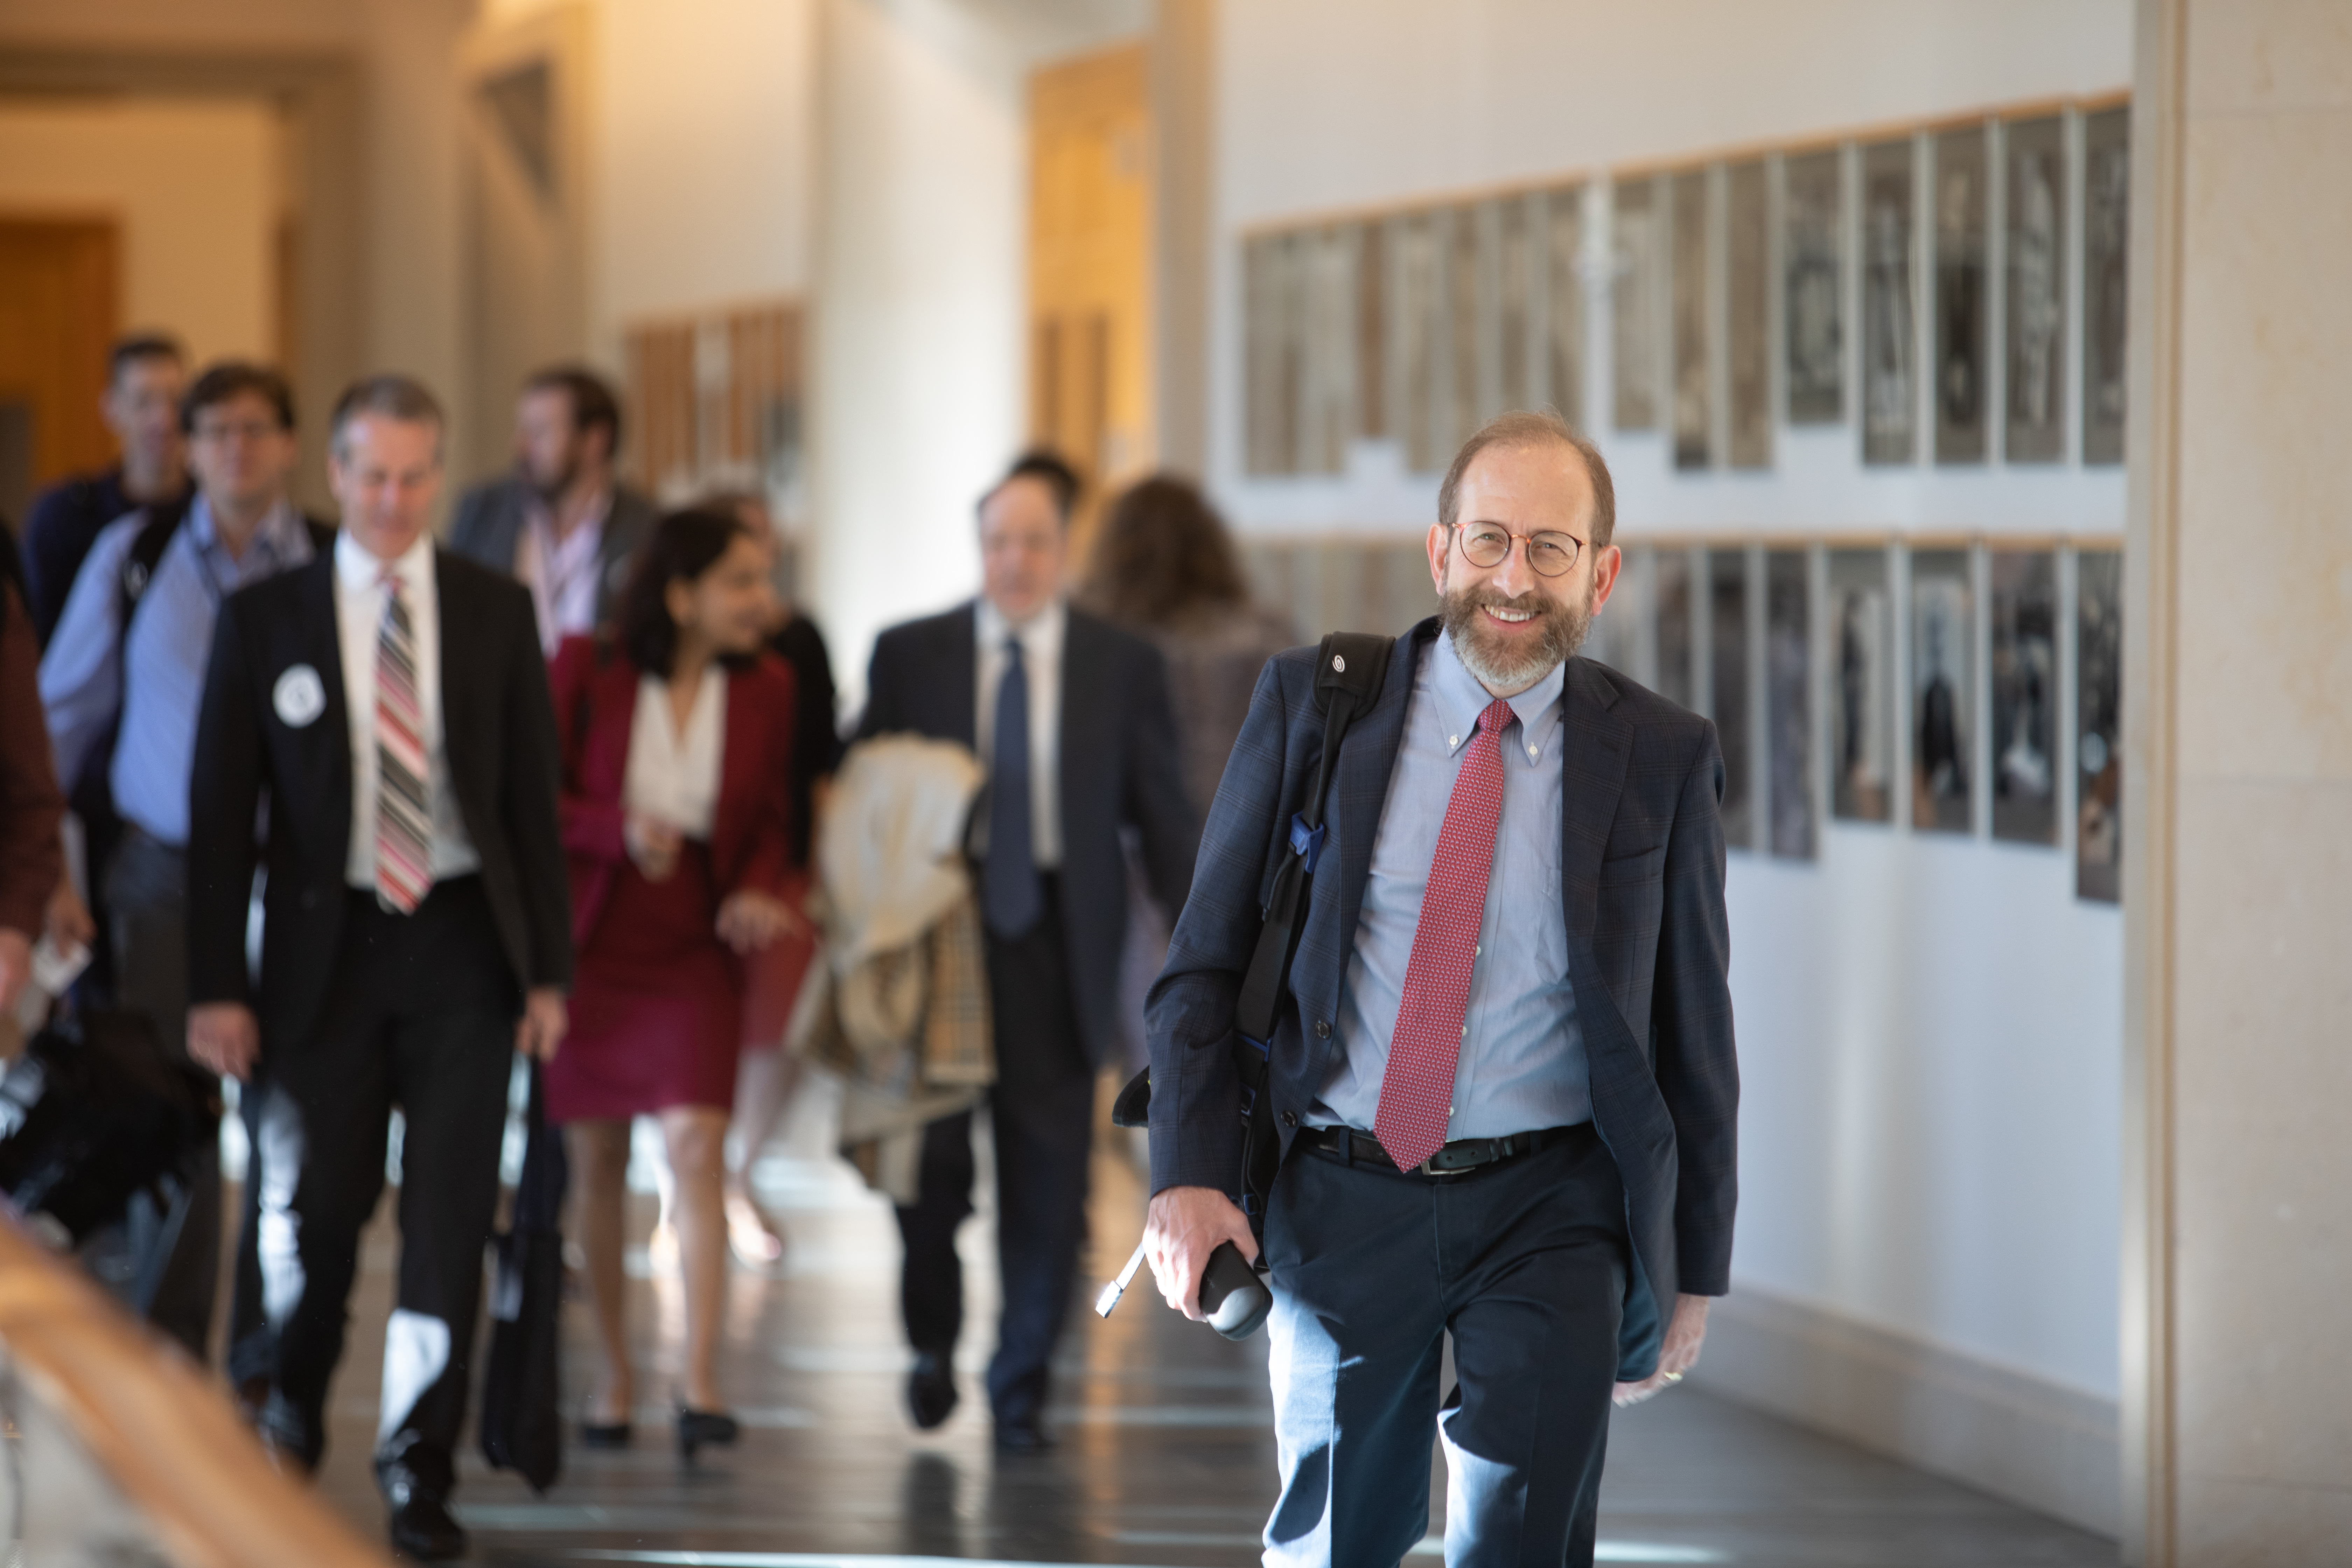 Provost Alan Garber walks into the conference center